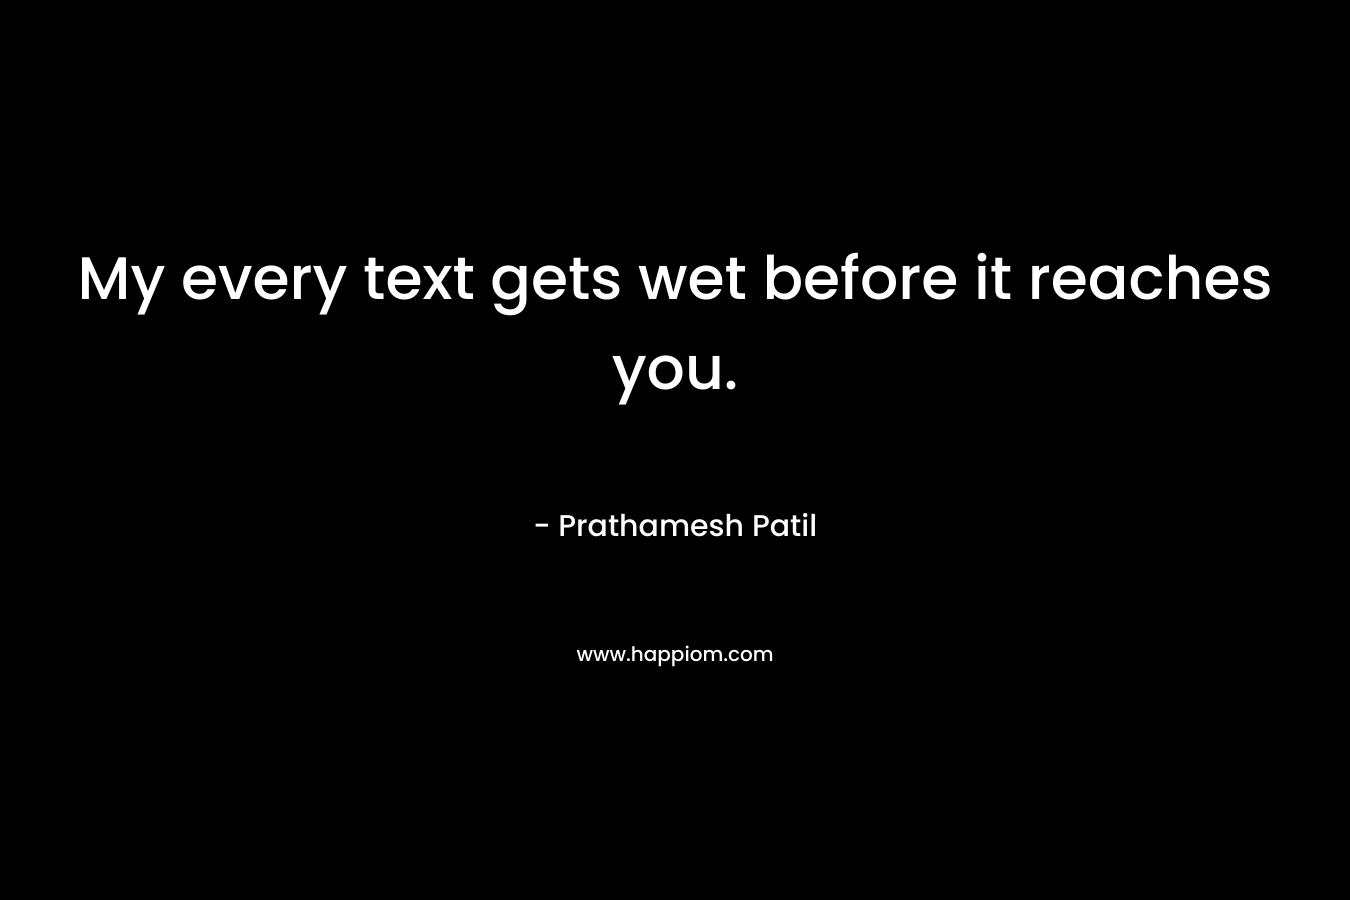 My every text gets wet before it reaches you. – Prathamesh Patil